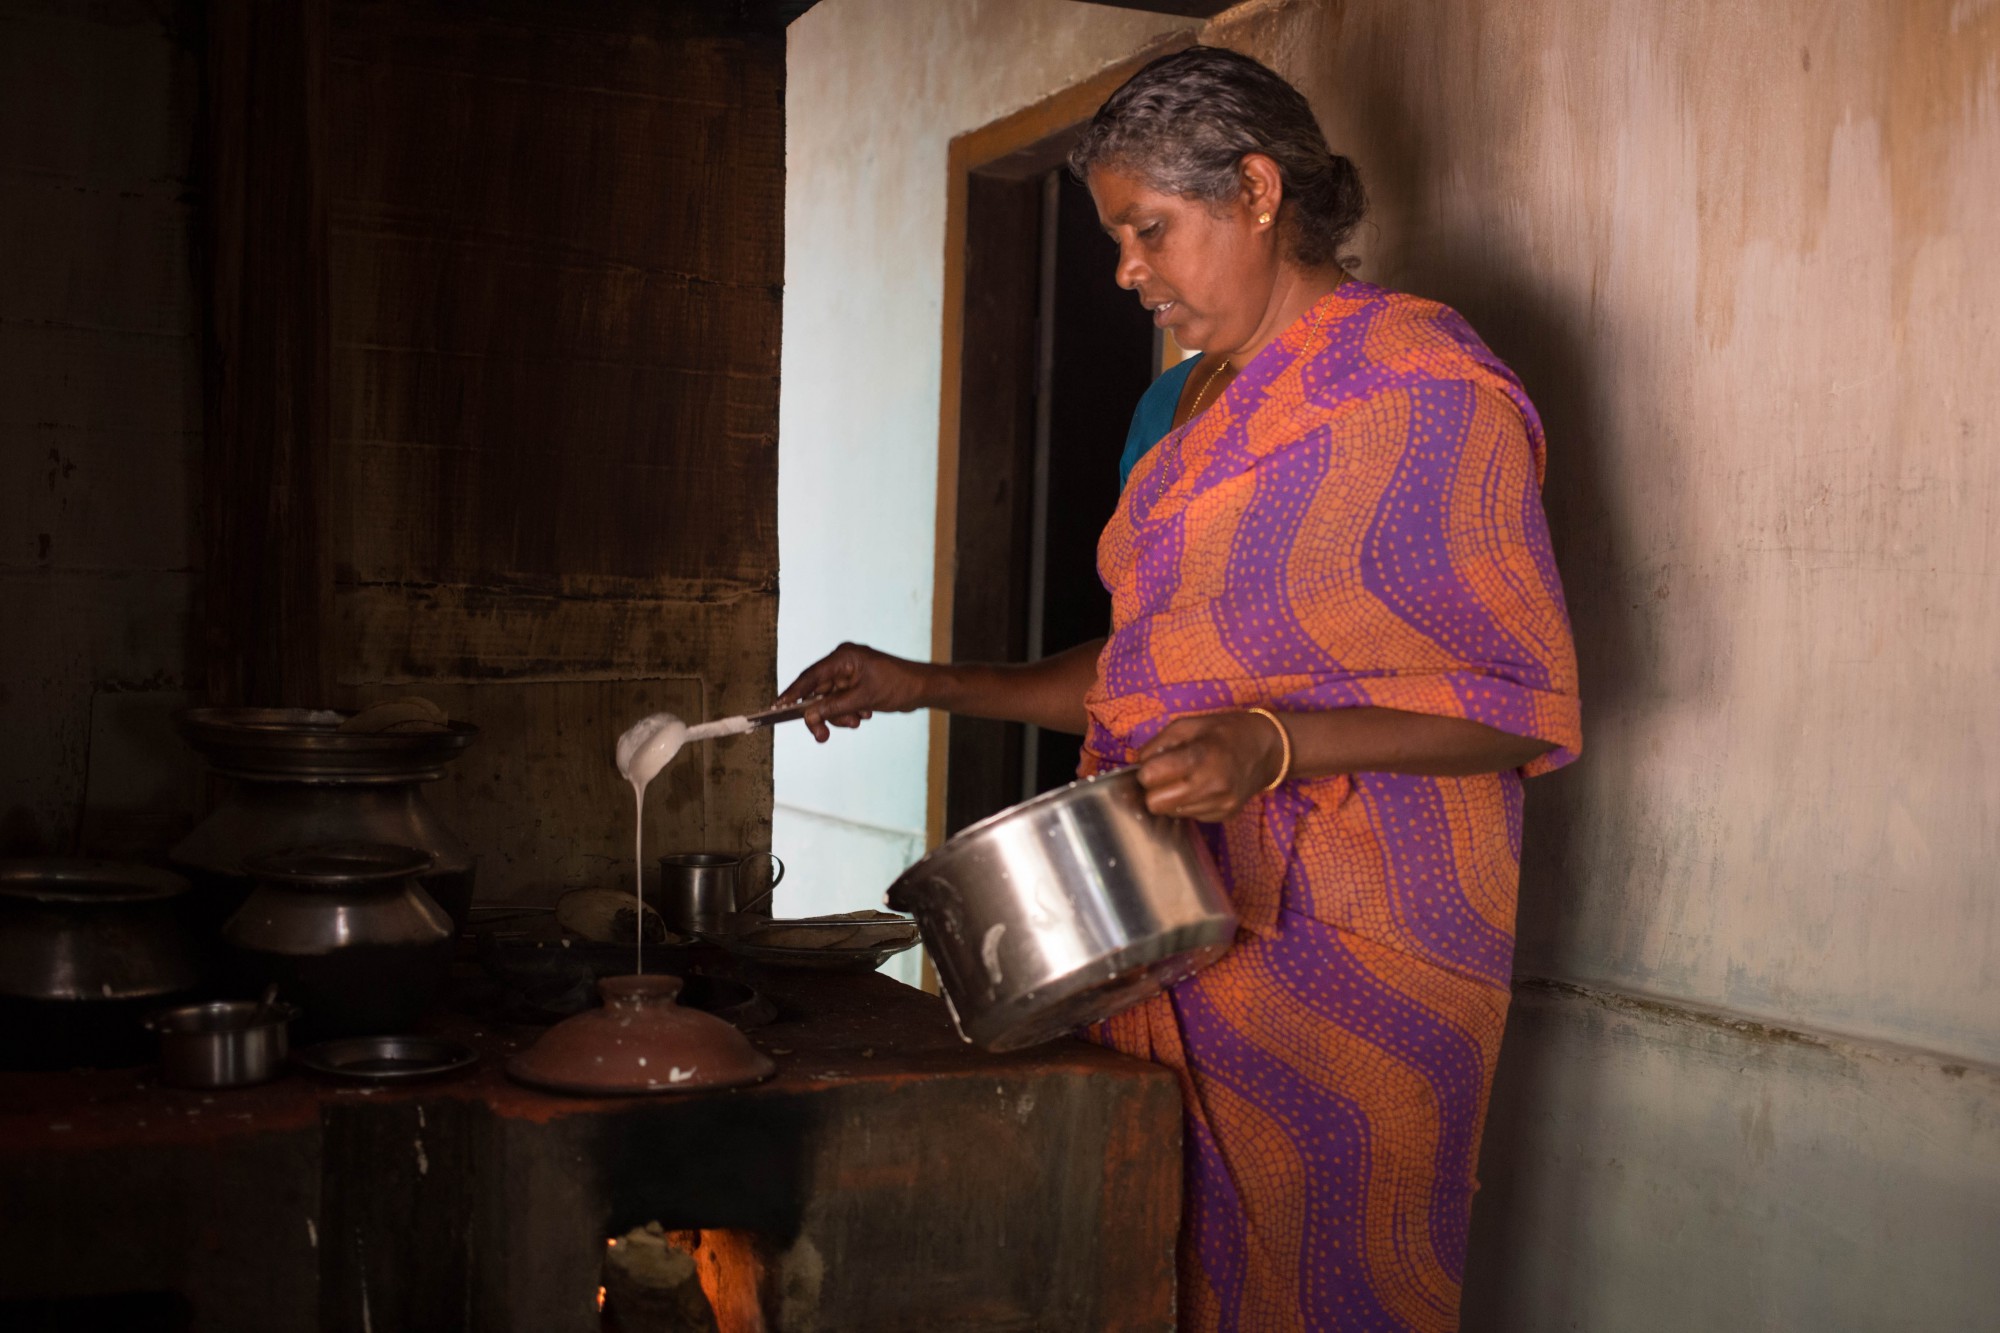 Kesavan’s wife, Sumathi learned to cook from her mother, who also loved to feed people and passed down all the special family recipes to her daughter.